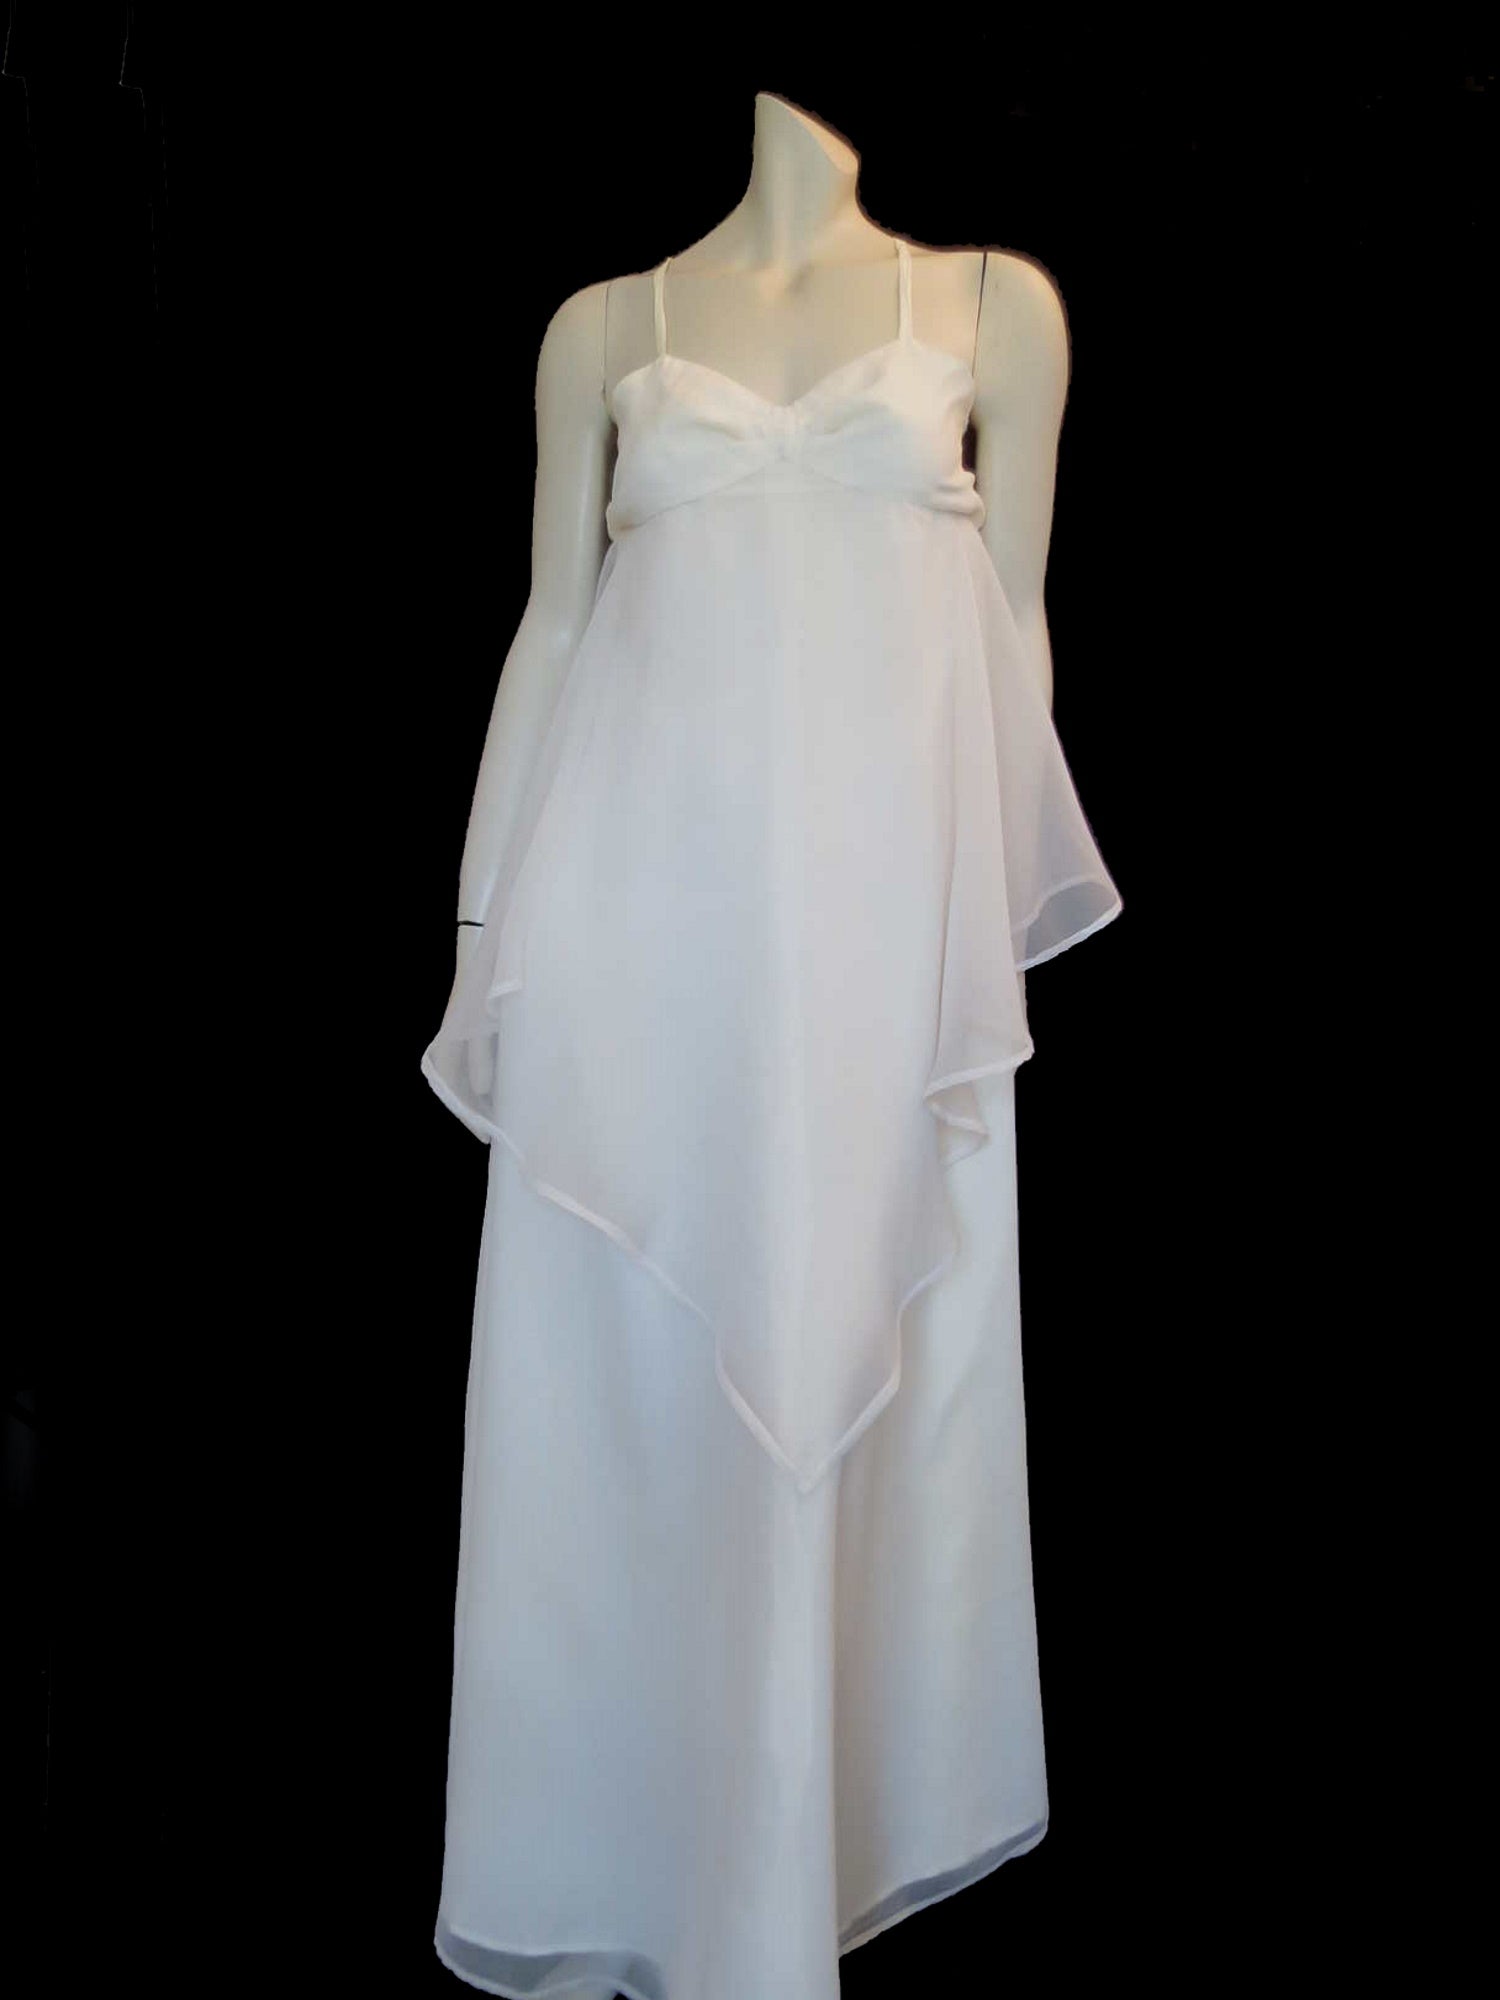 Ivory Chiffon Evening Gown With Handkerchief Layer - 1970s - Bust 86 cm